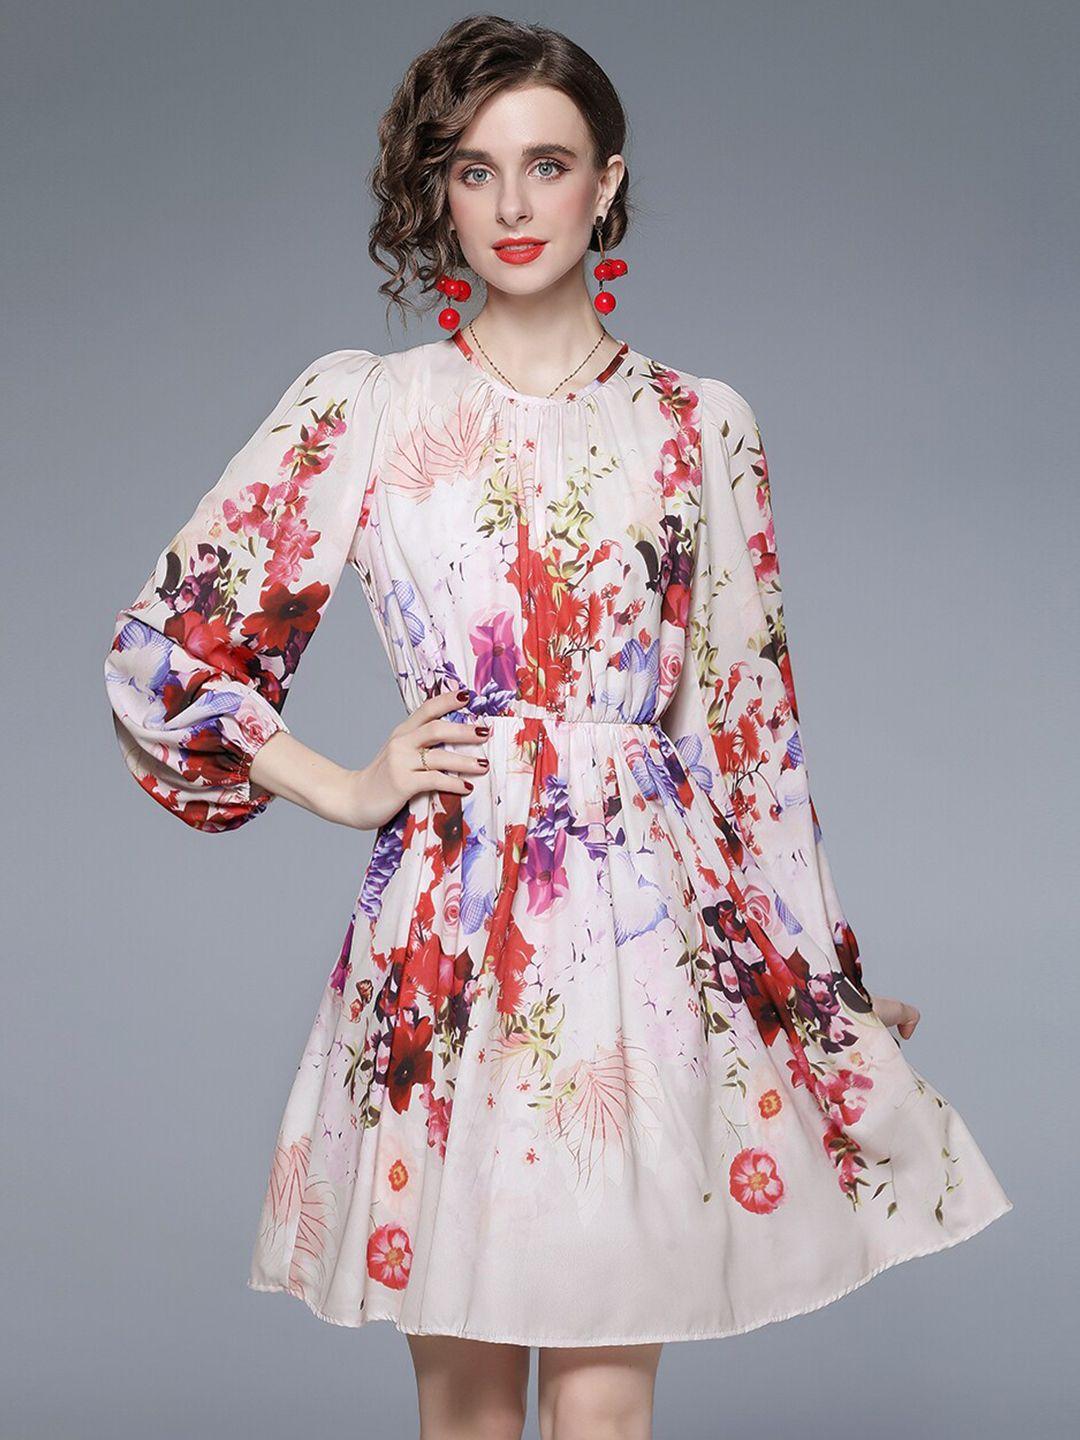 jc collection red floral printed a-line dress